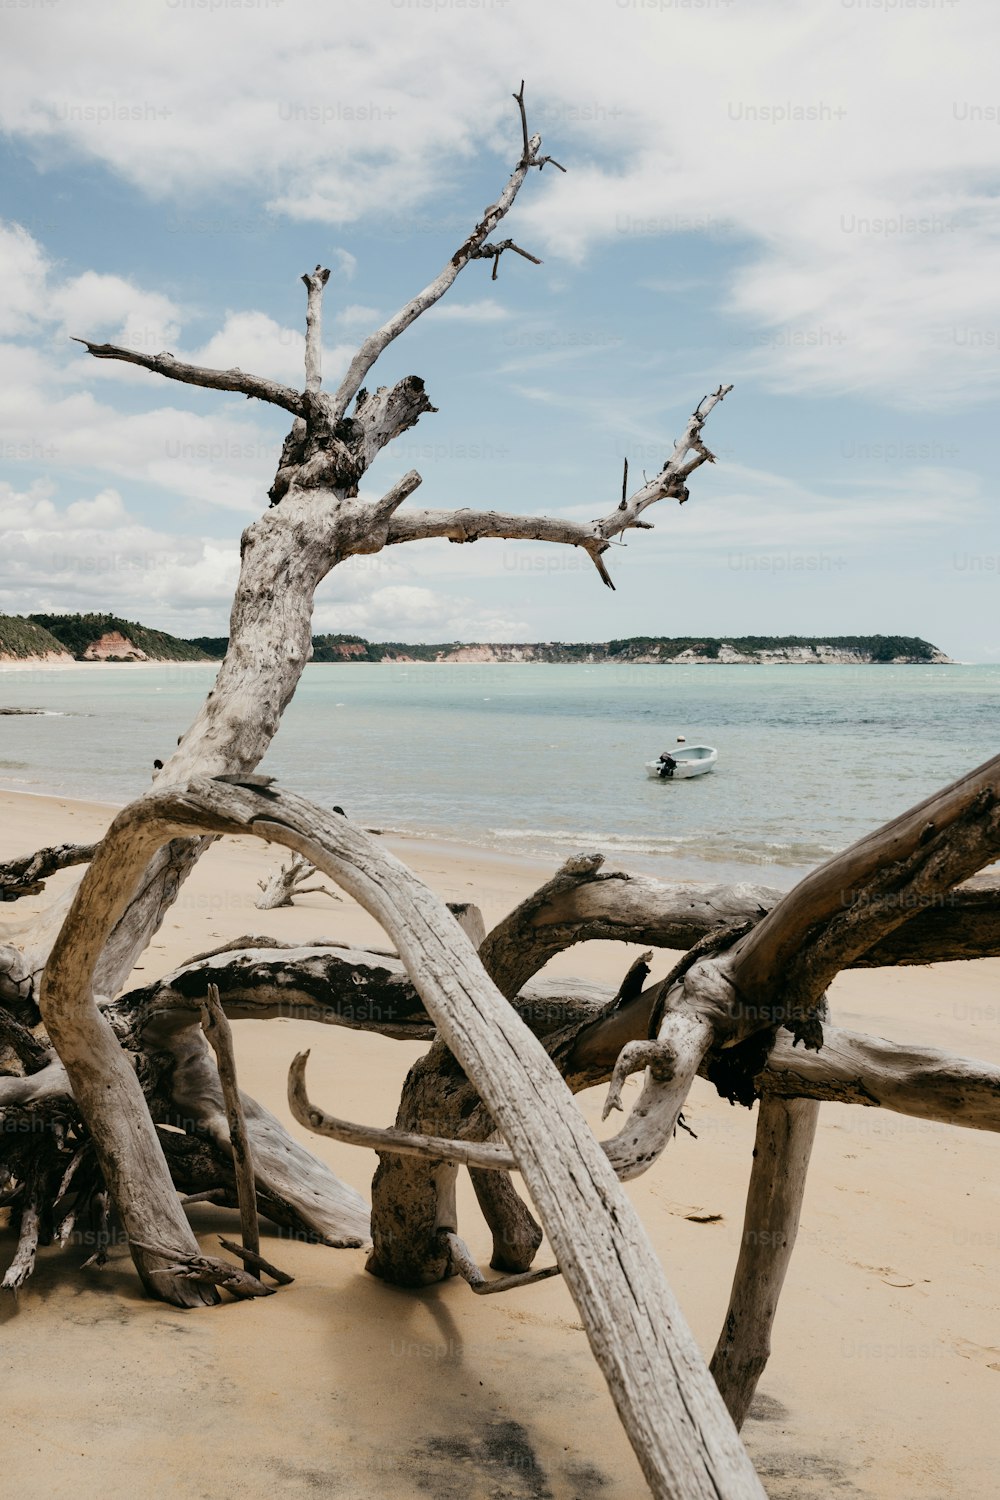 a driftwood tree on a beach with a body of water in the background